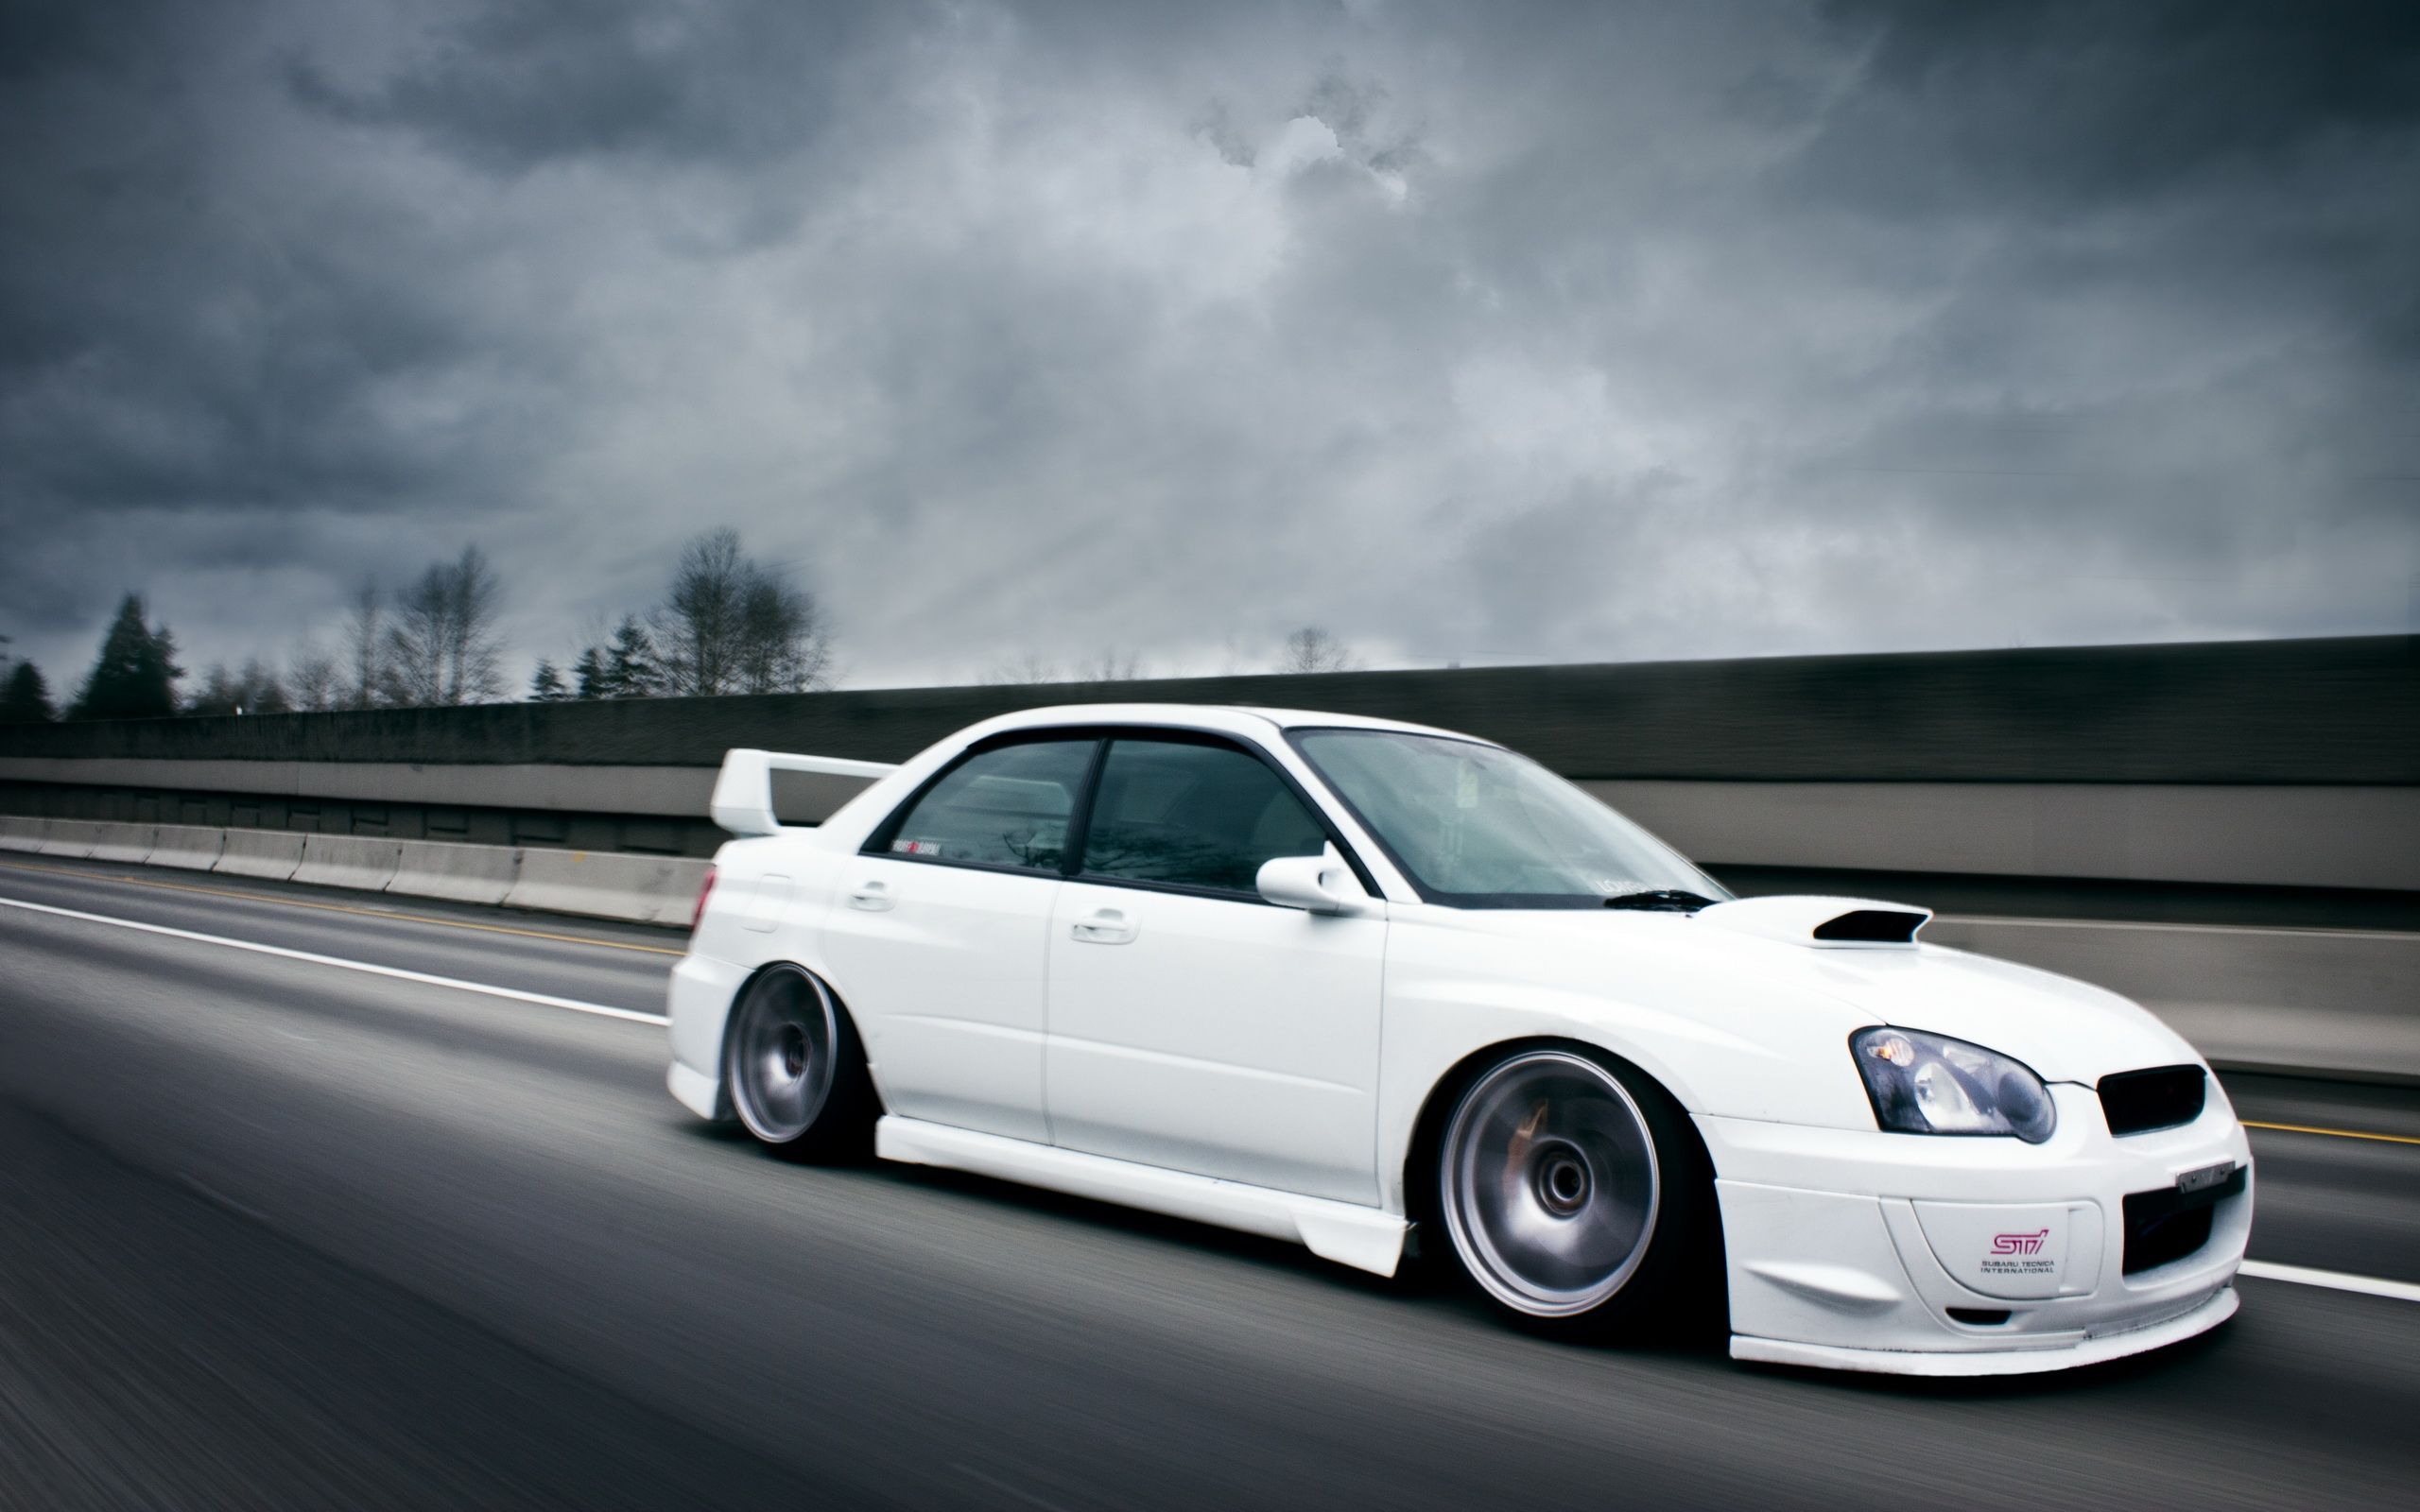 Subaru Impreza STI wallpapers and images - wallpapers, pictures